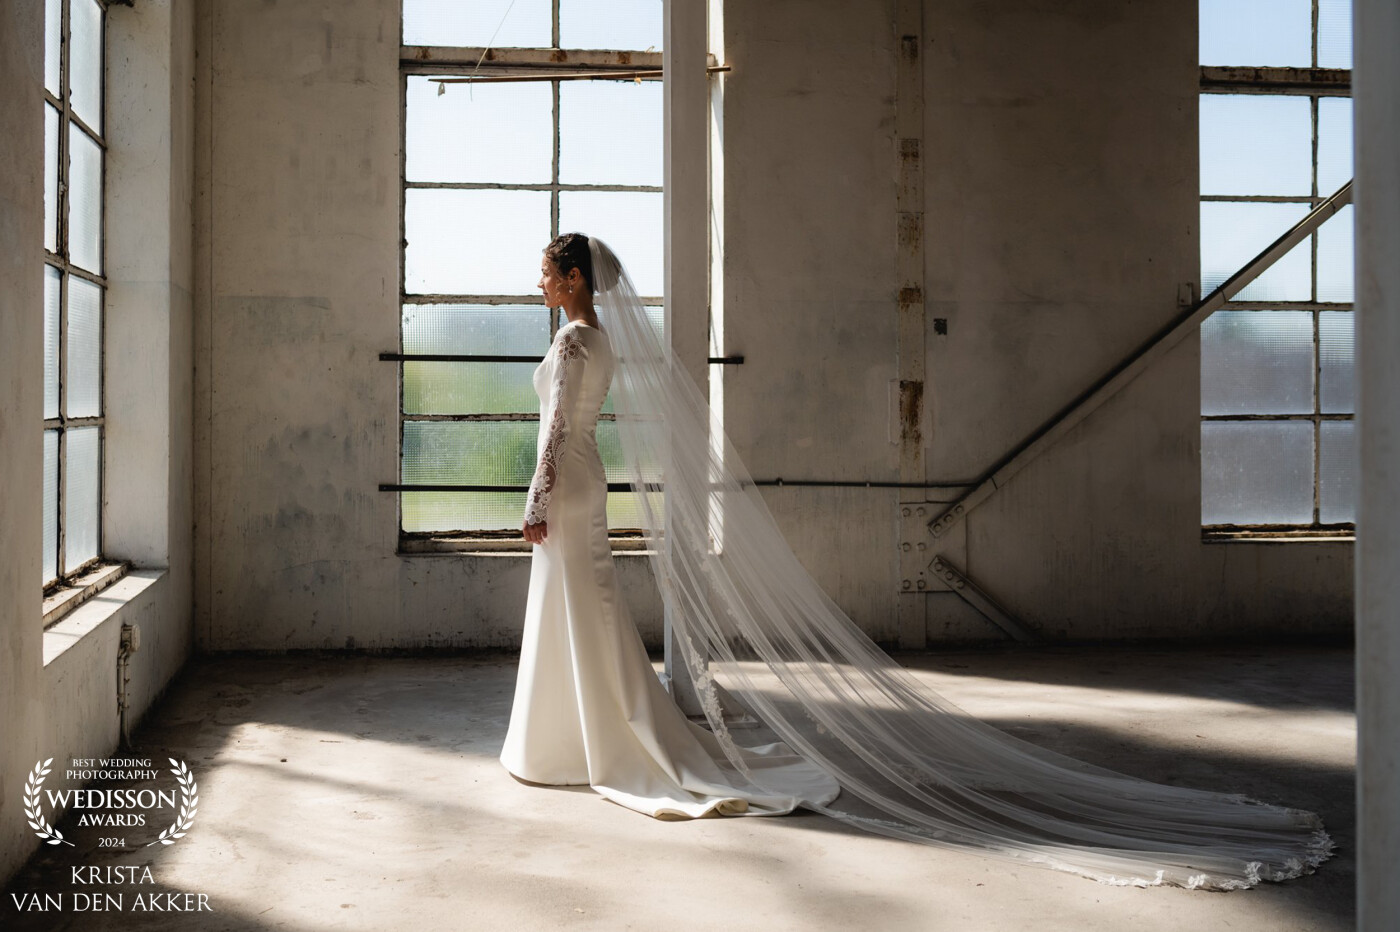 I photographed this beautiful bride in an old factory... I love the simplicity.